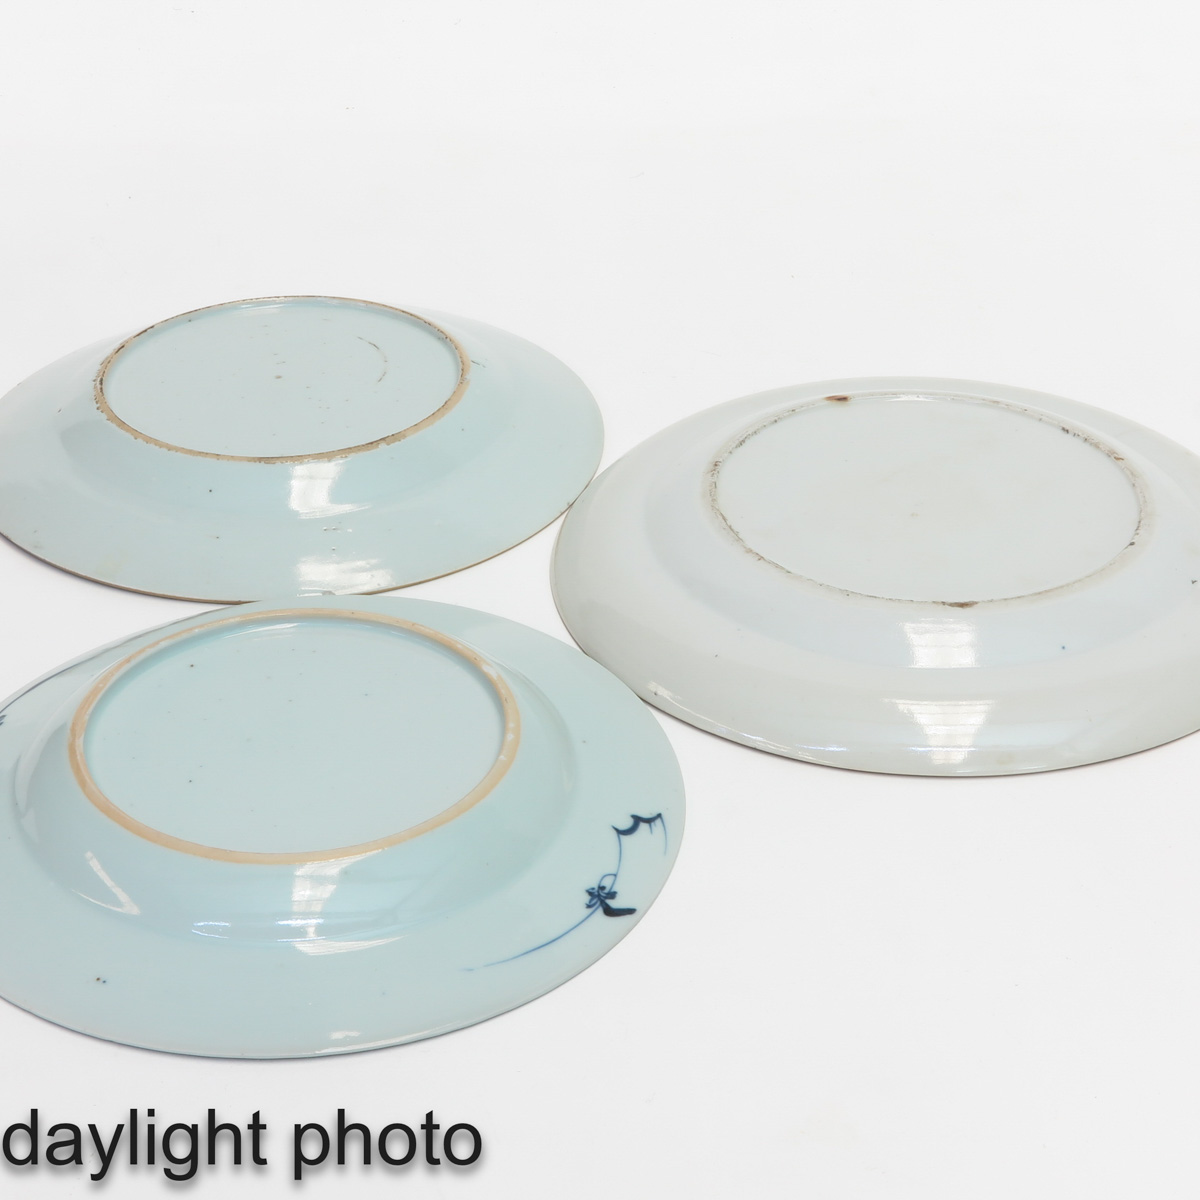 A Collection of 3 Plates - Image 10 of 10